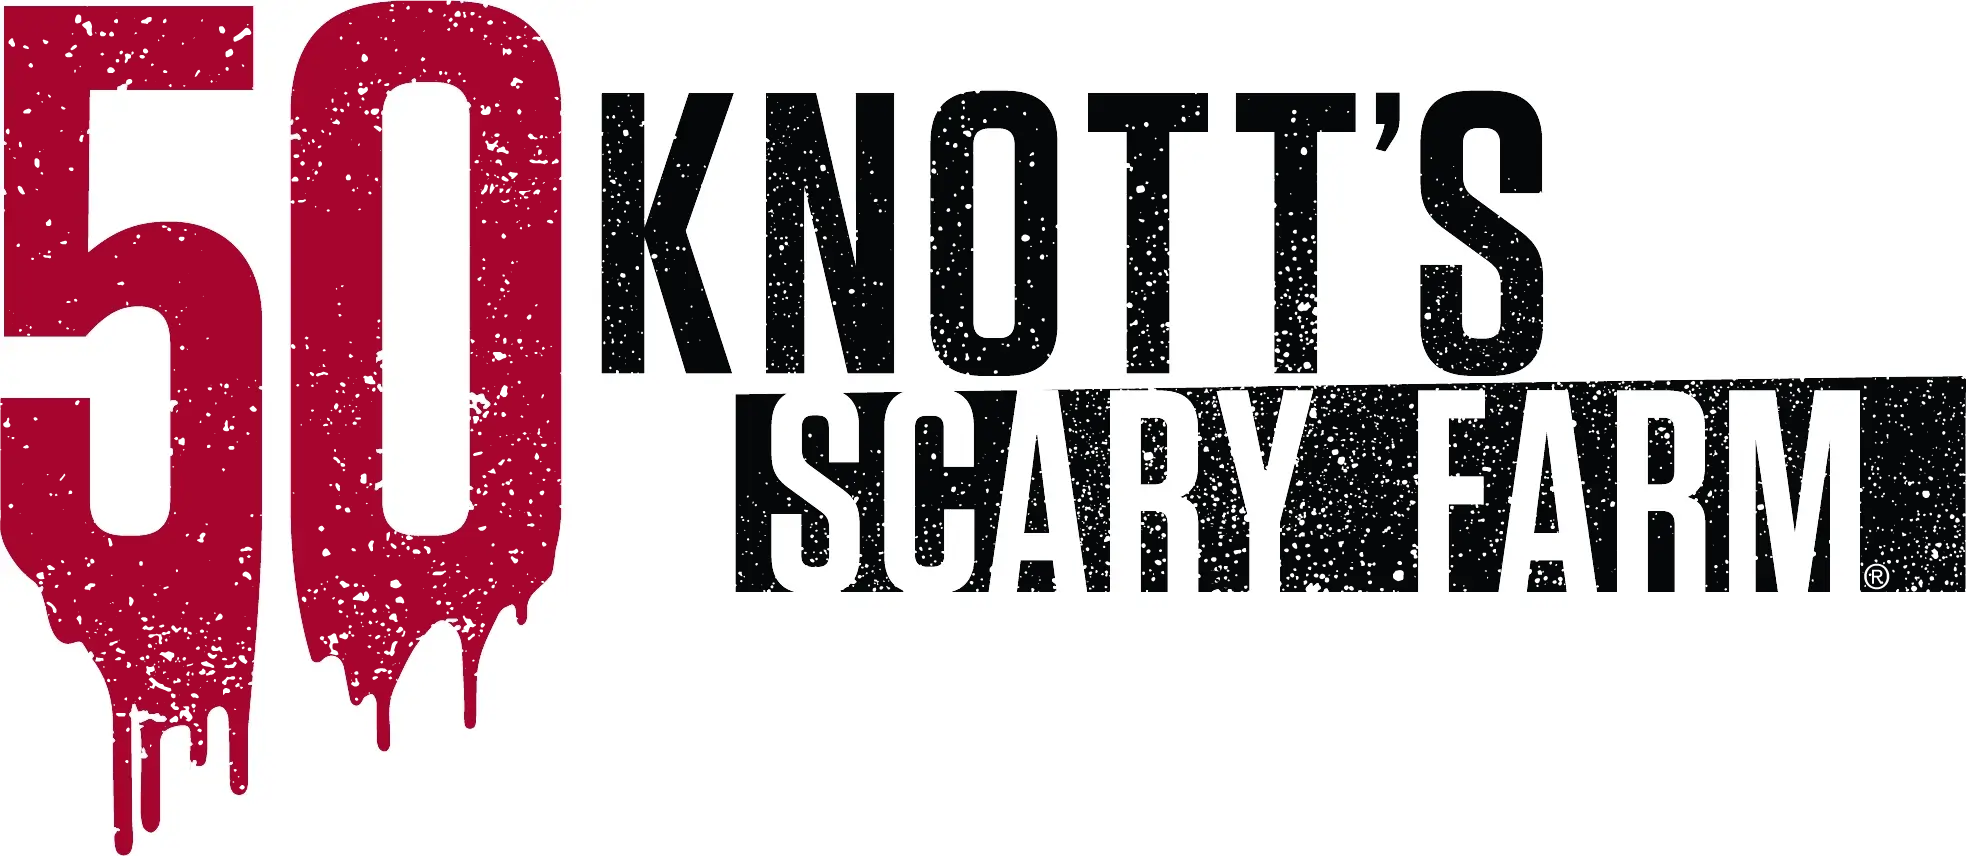 Knott's Scary Farm 50th Anniversary Tickets On Sale Now